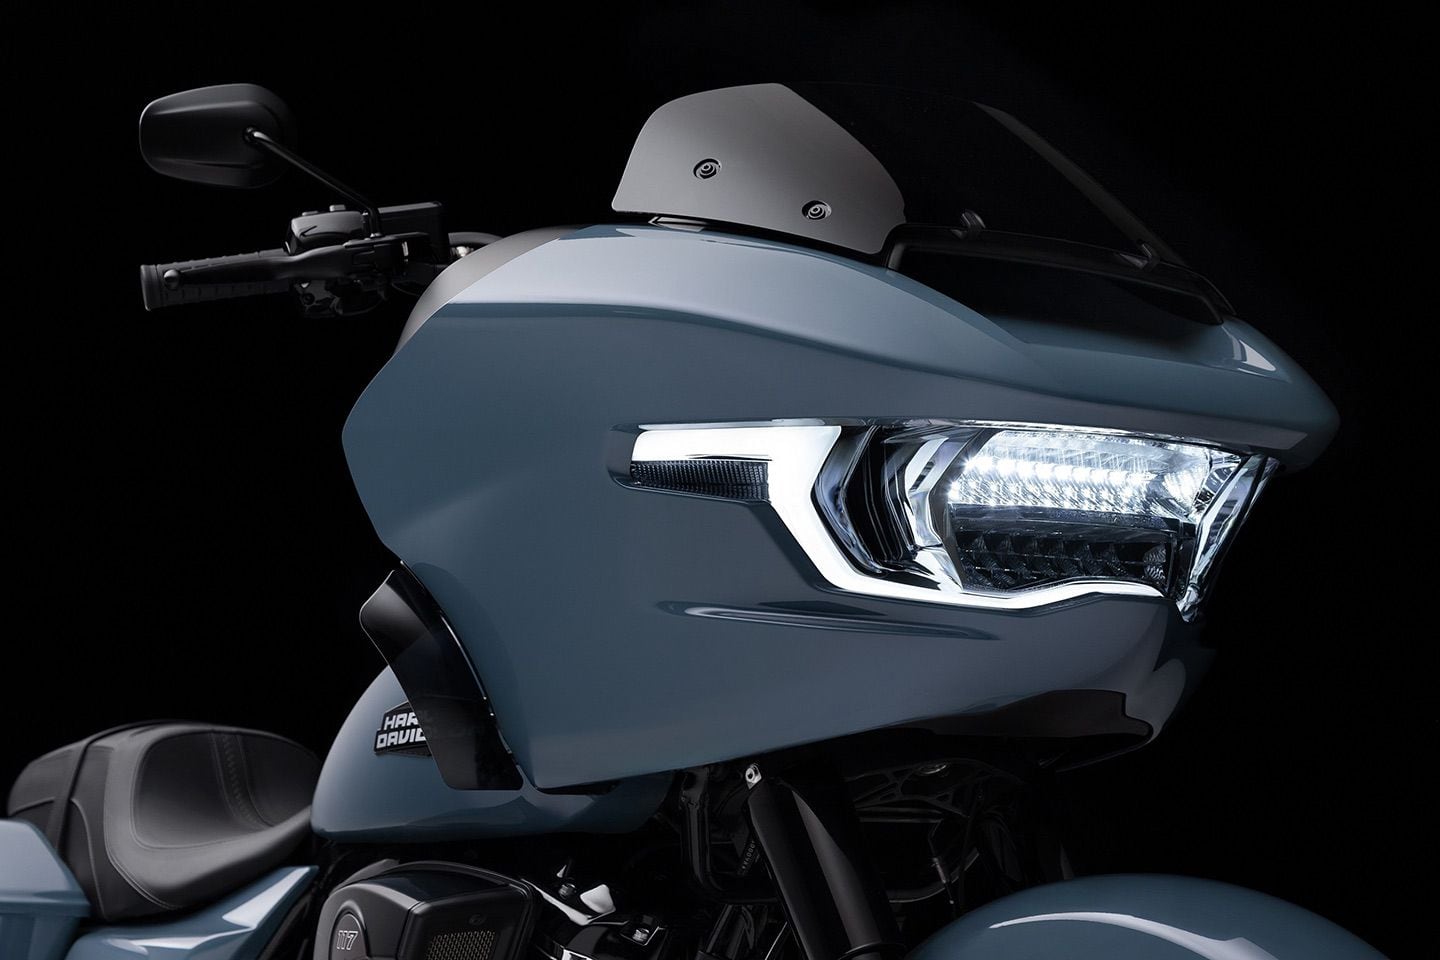 The 2024 Road Glide’s shark nose frame-mounted fairing also features a new shape and windshield design along with LED lighting.